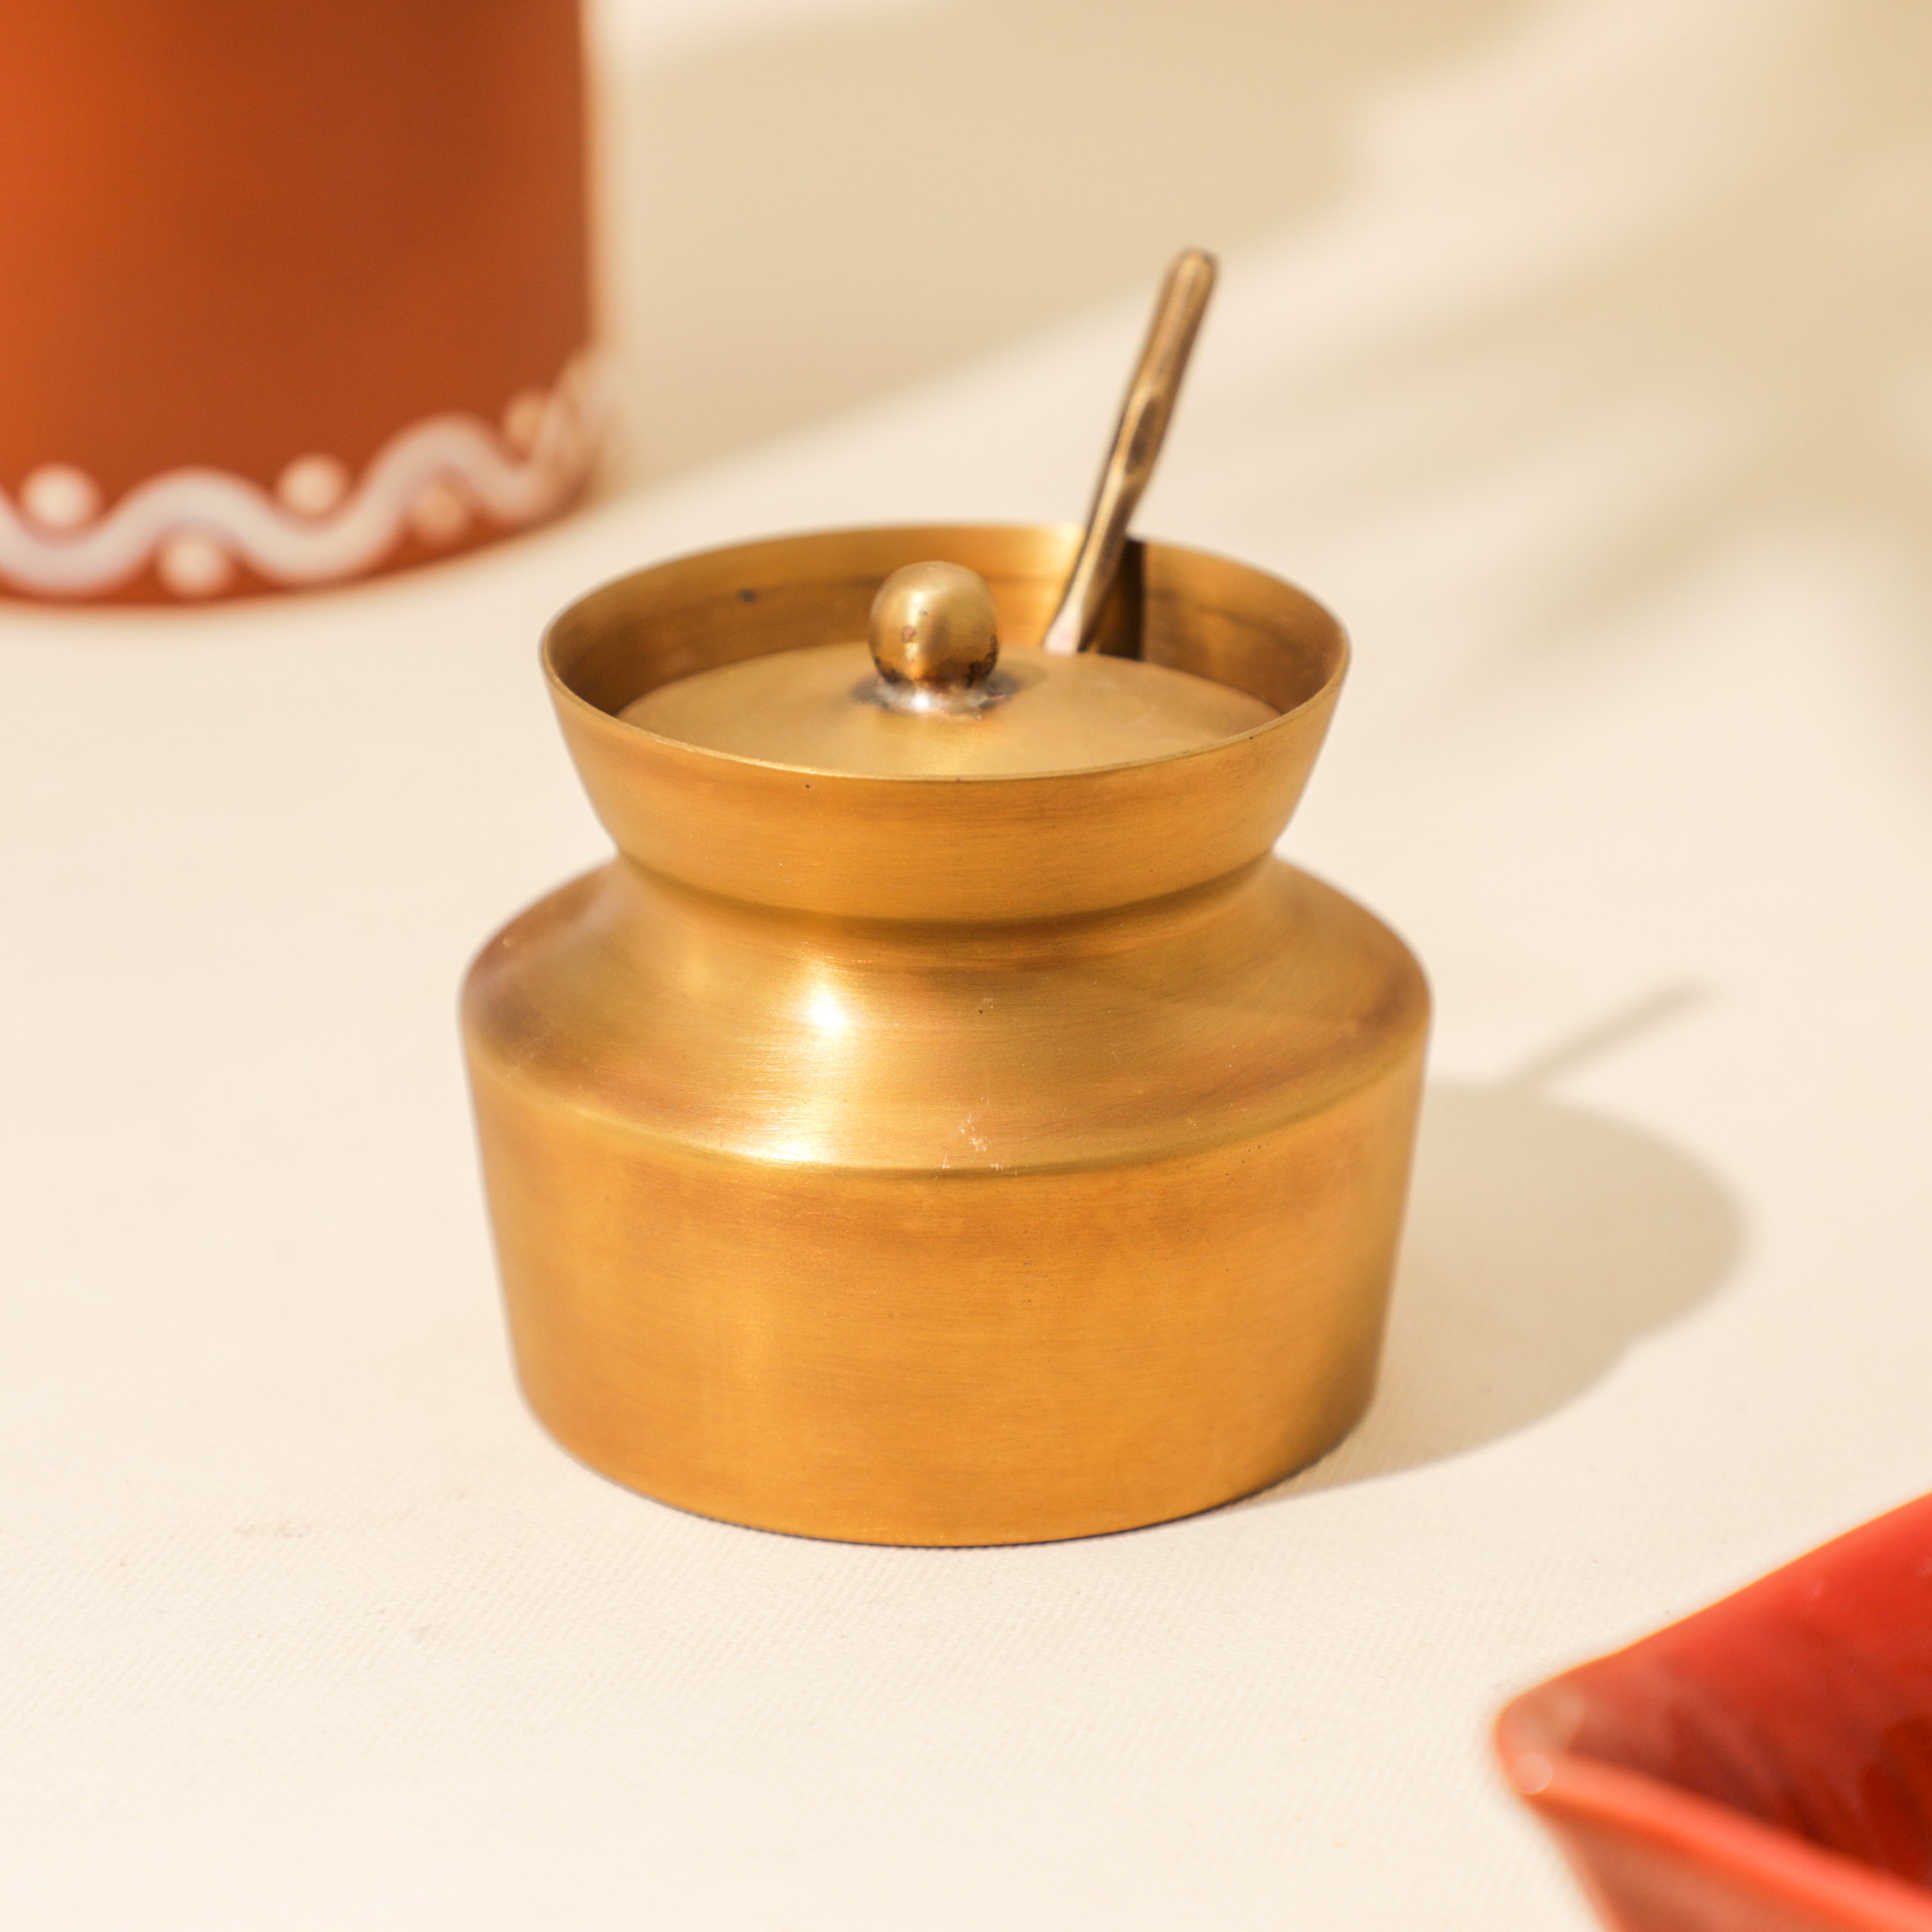 Buy Dabara Set Online in USA - Traditional Madras Filter Coffee Cups in US